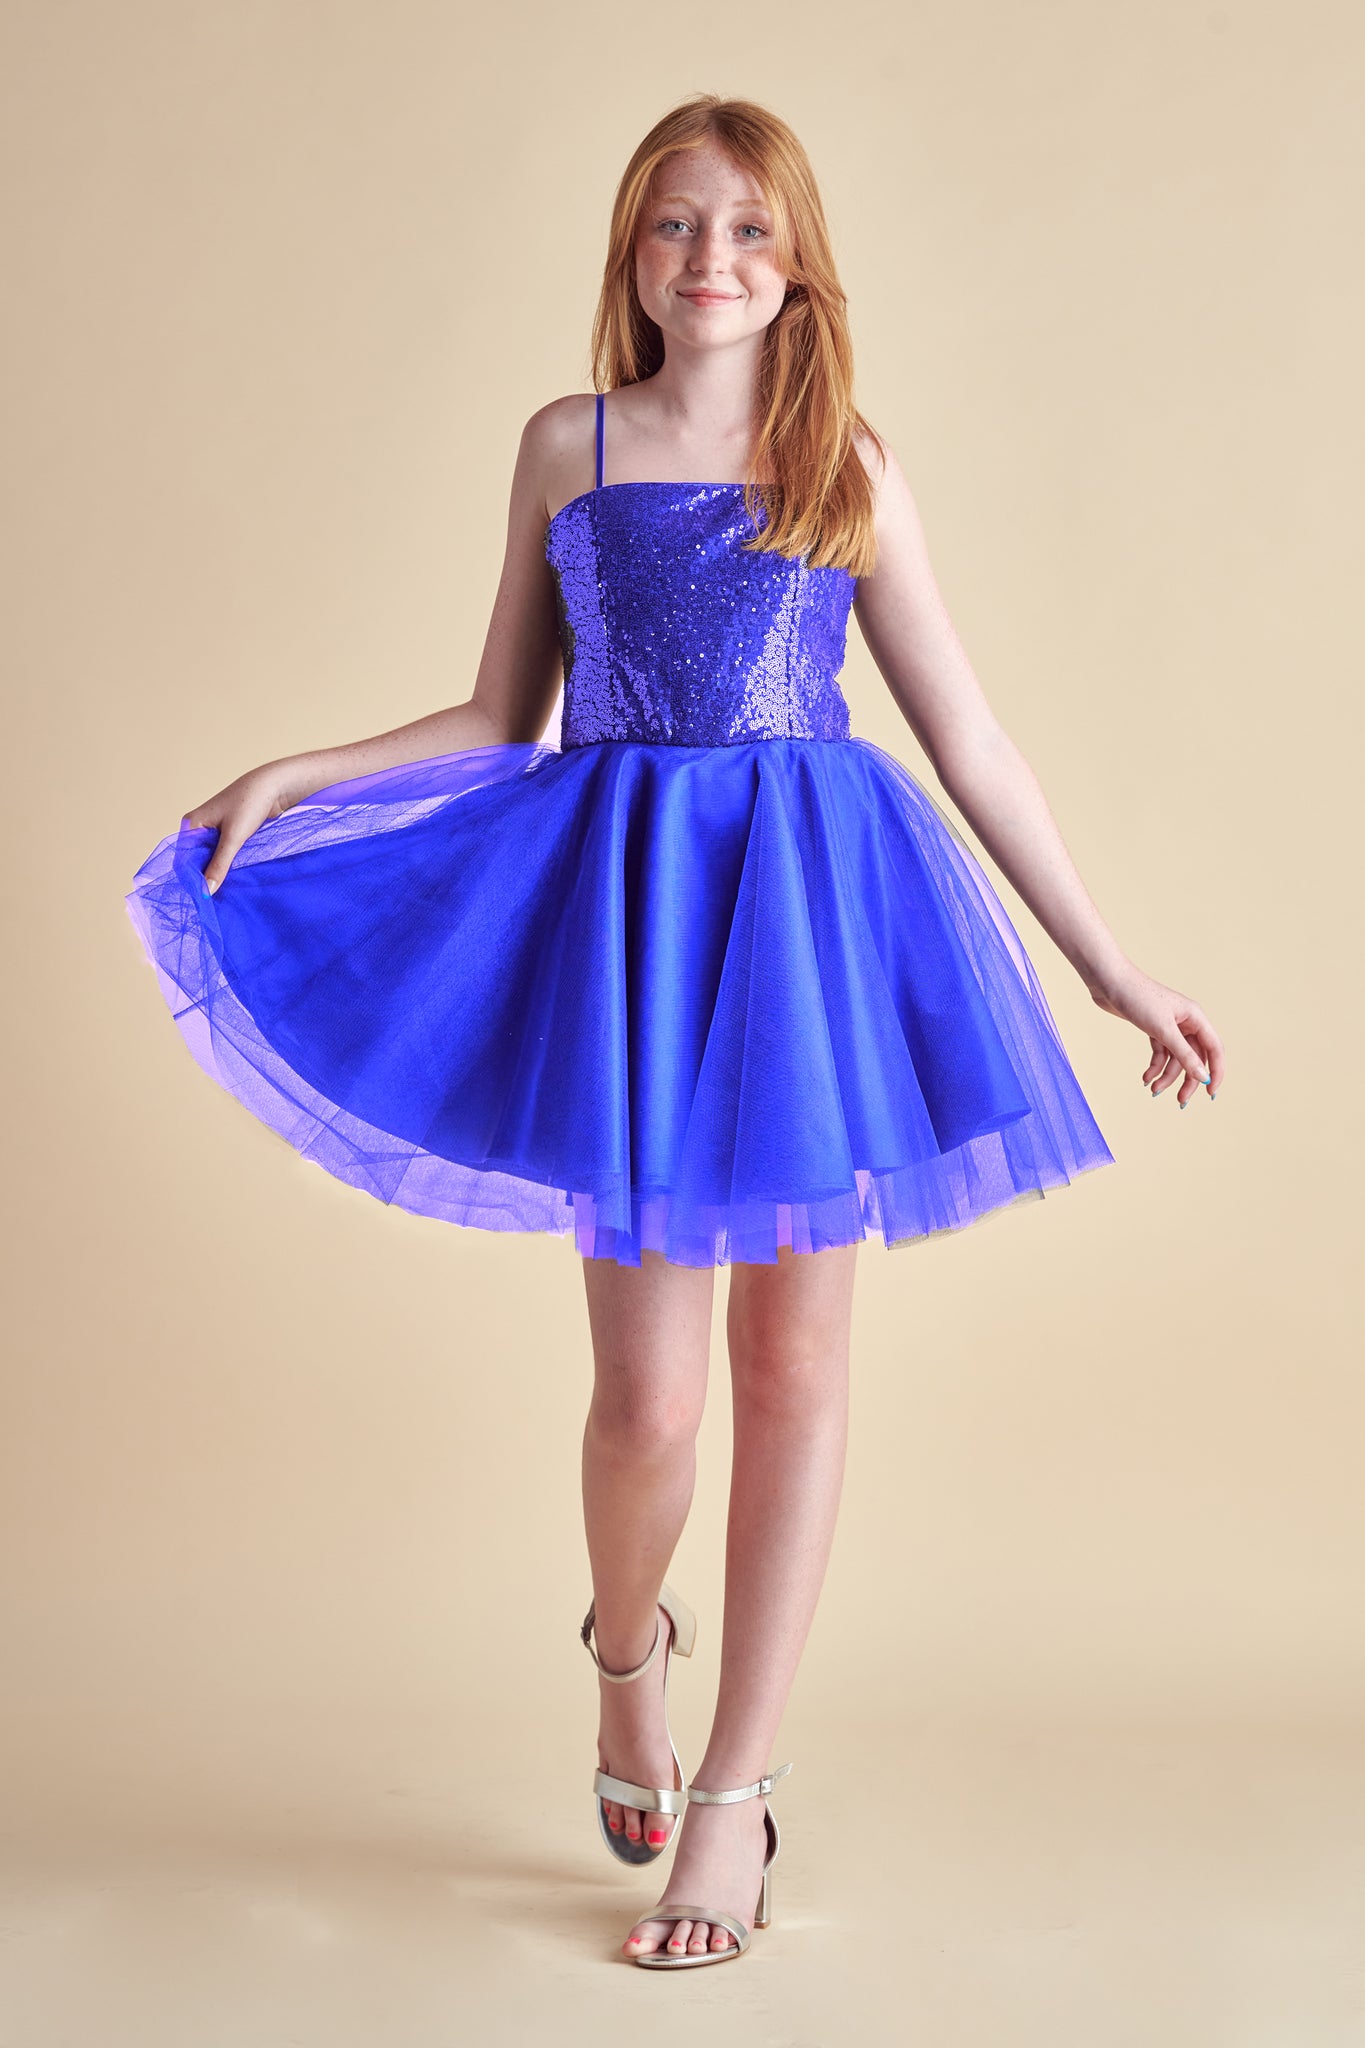 Red head wearing a cobalt blue sequin and satin dress.